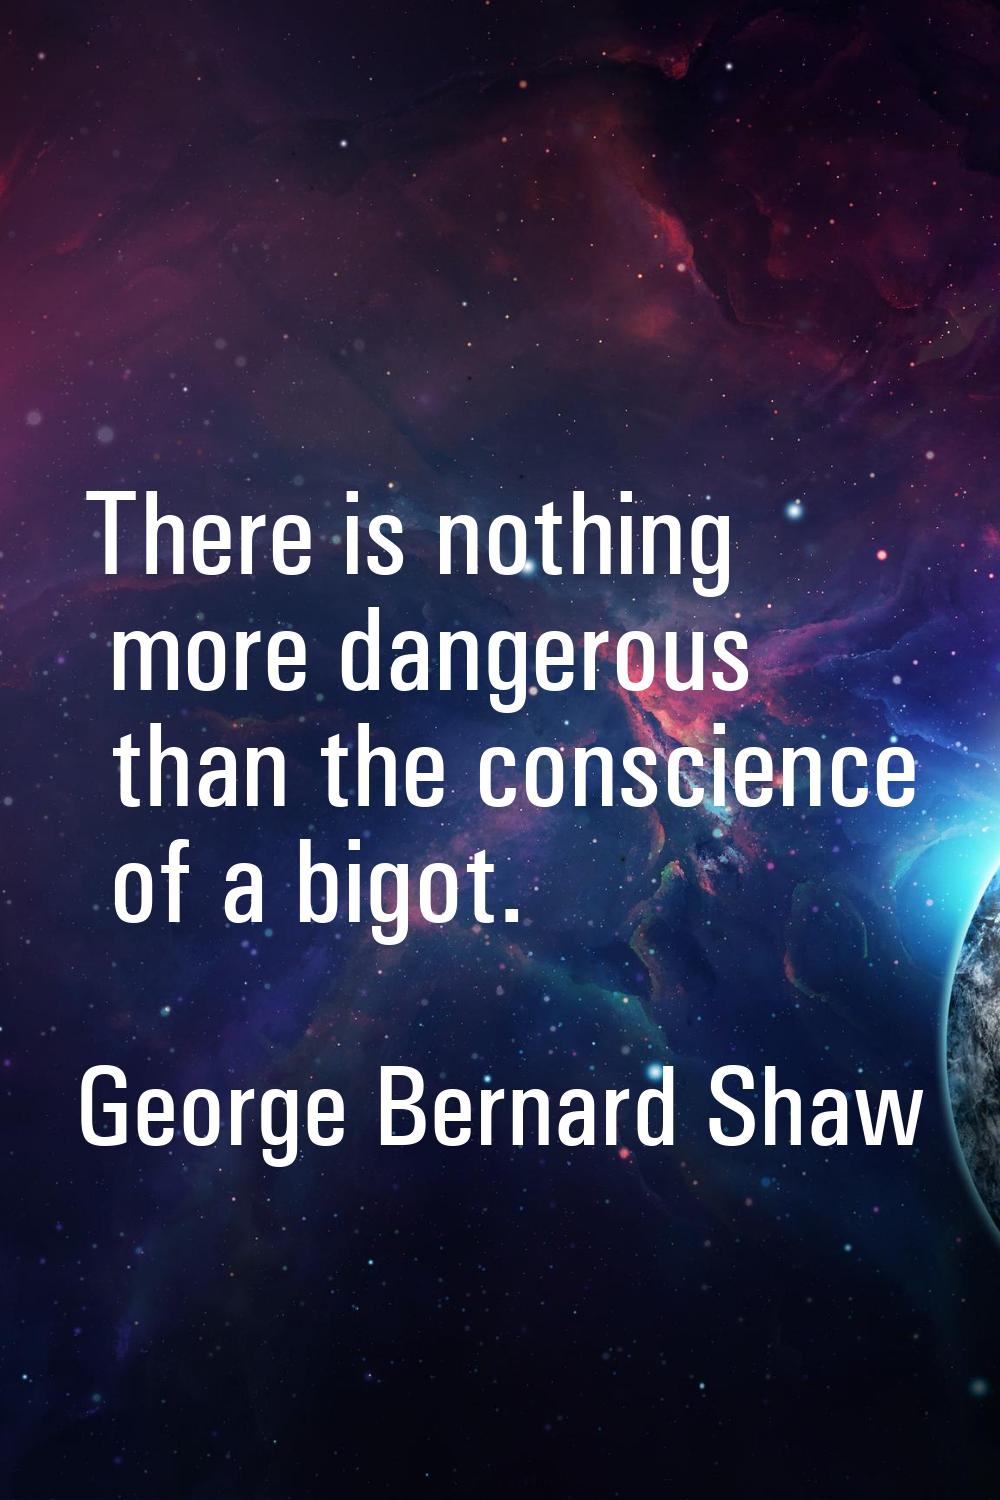 There is nothing more dangerous than the conscience of a bigot.